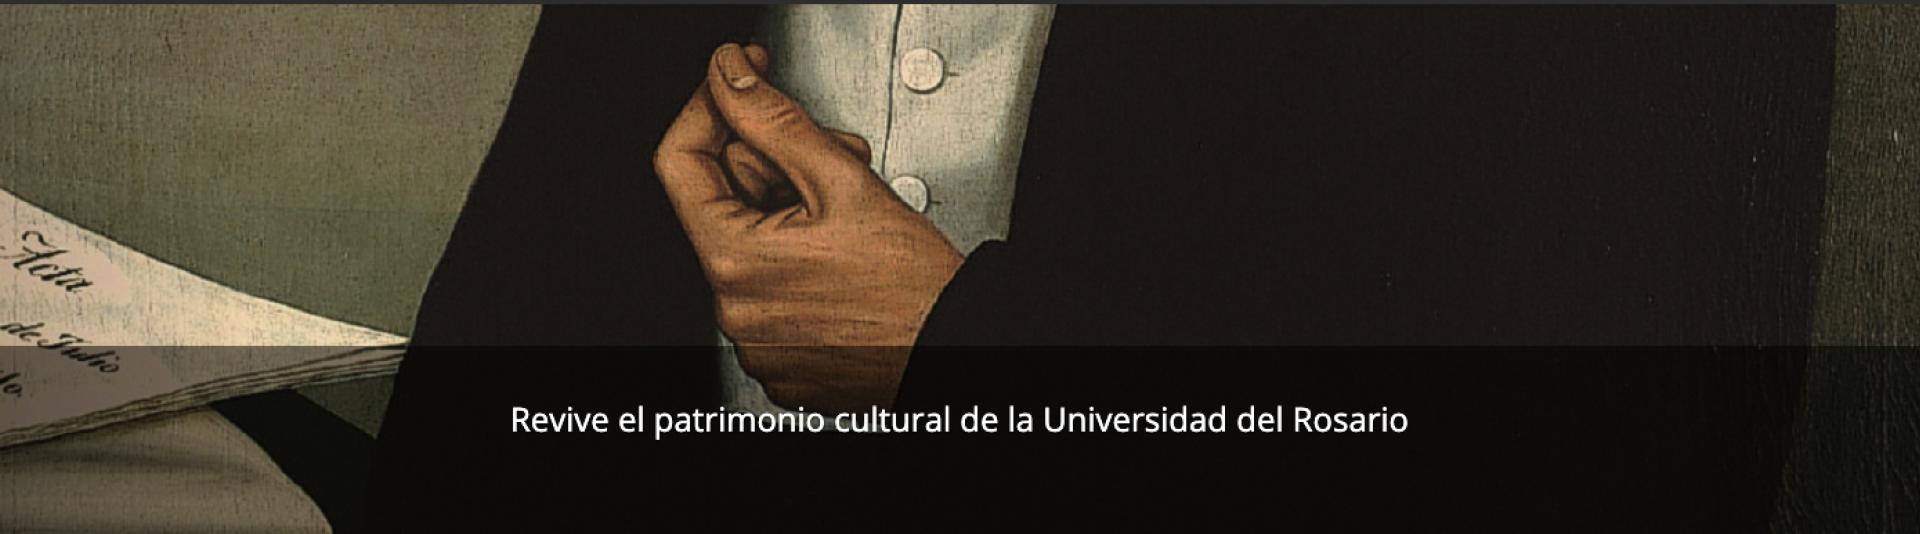 museo-slide4.png